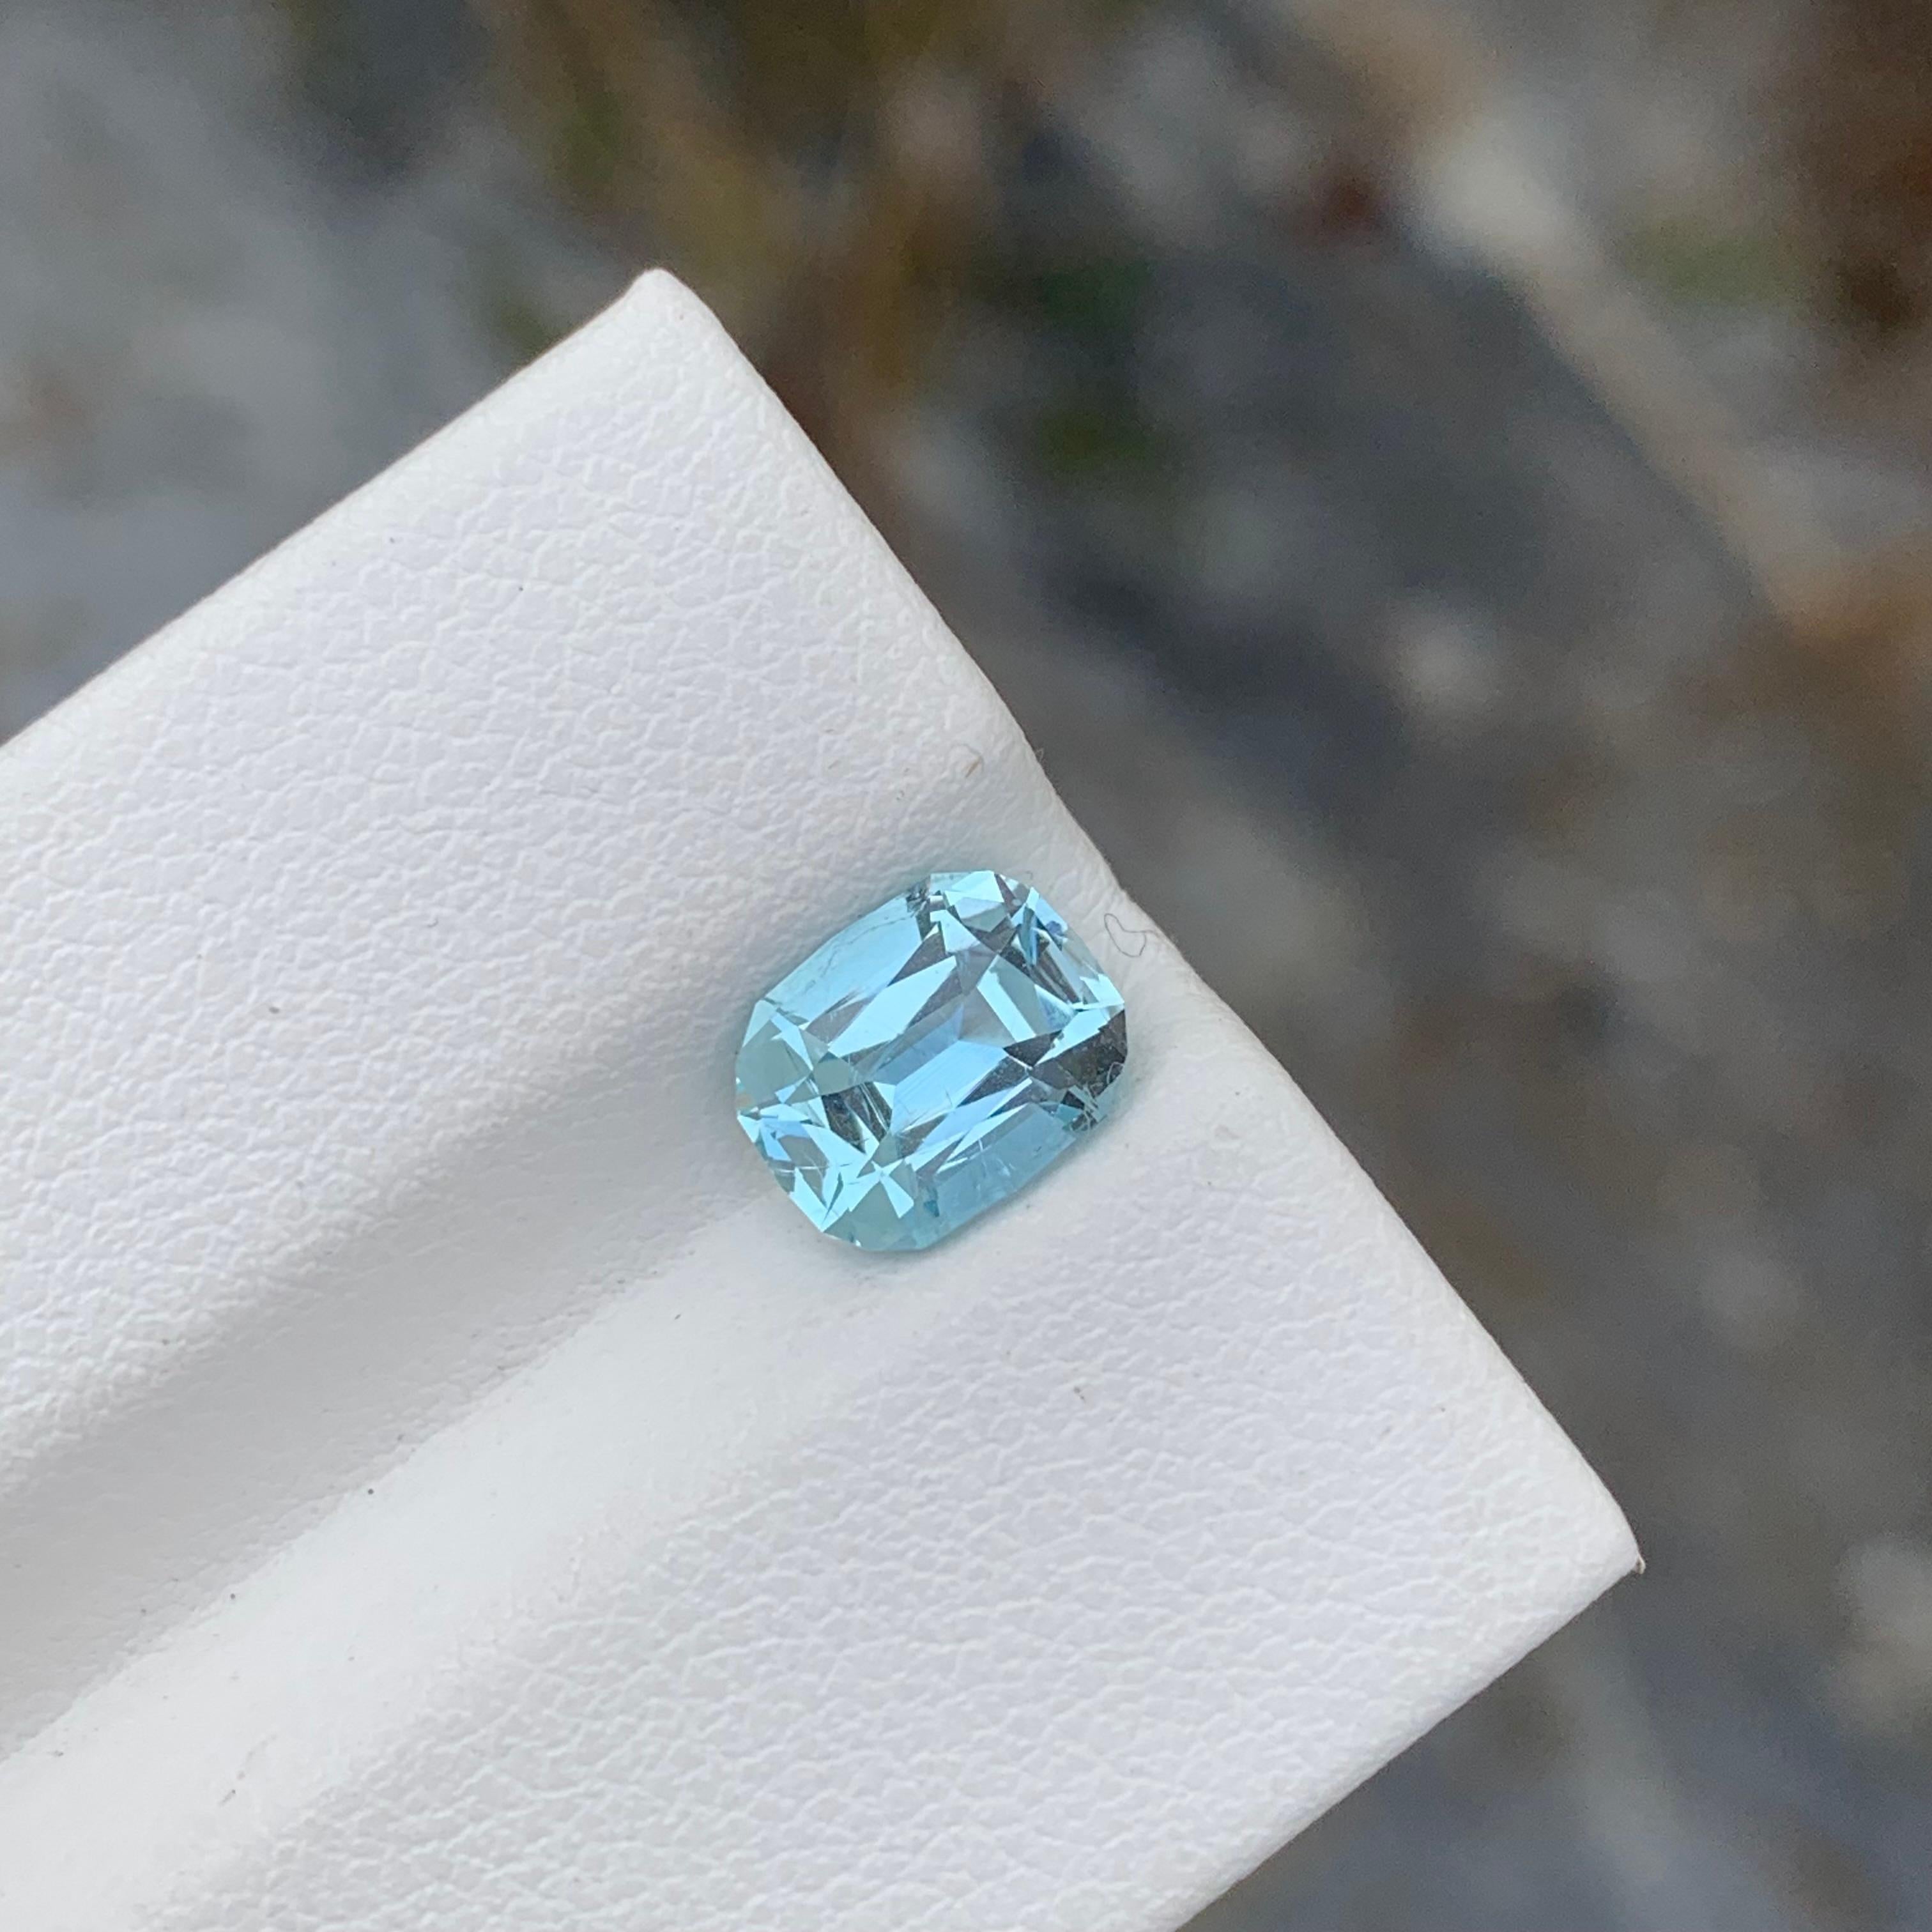 Loose Aquamarine
Weight: 1.60 Carat
Dimension: 8.2 x 6.6 x 4.7 Mm
Colour : Pale Blue 
Origin: Shigar Valley, Pakistan
Treatment: Non
Certificate : On Demand
Shape: Cushion

Aquamarine is a captivating gemstone known for its enchanting blue-green